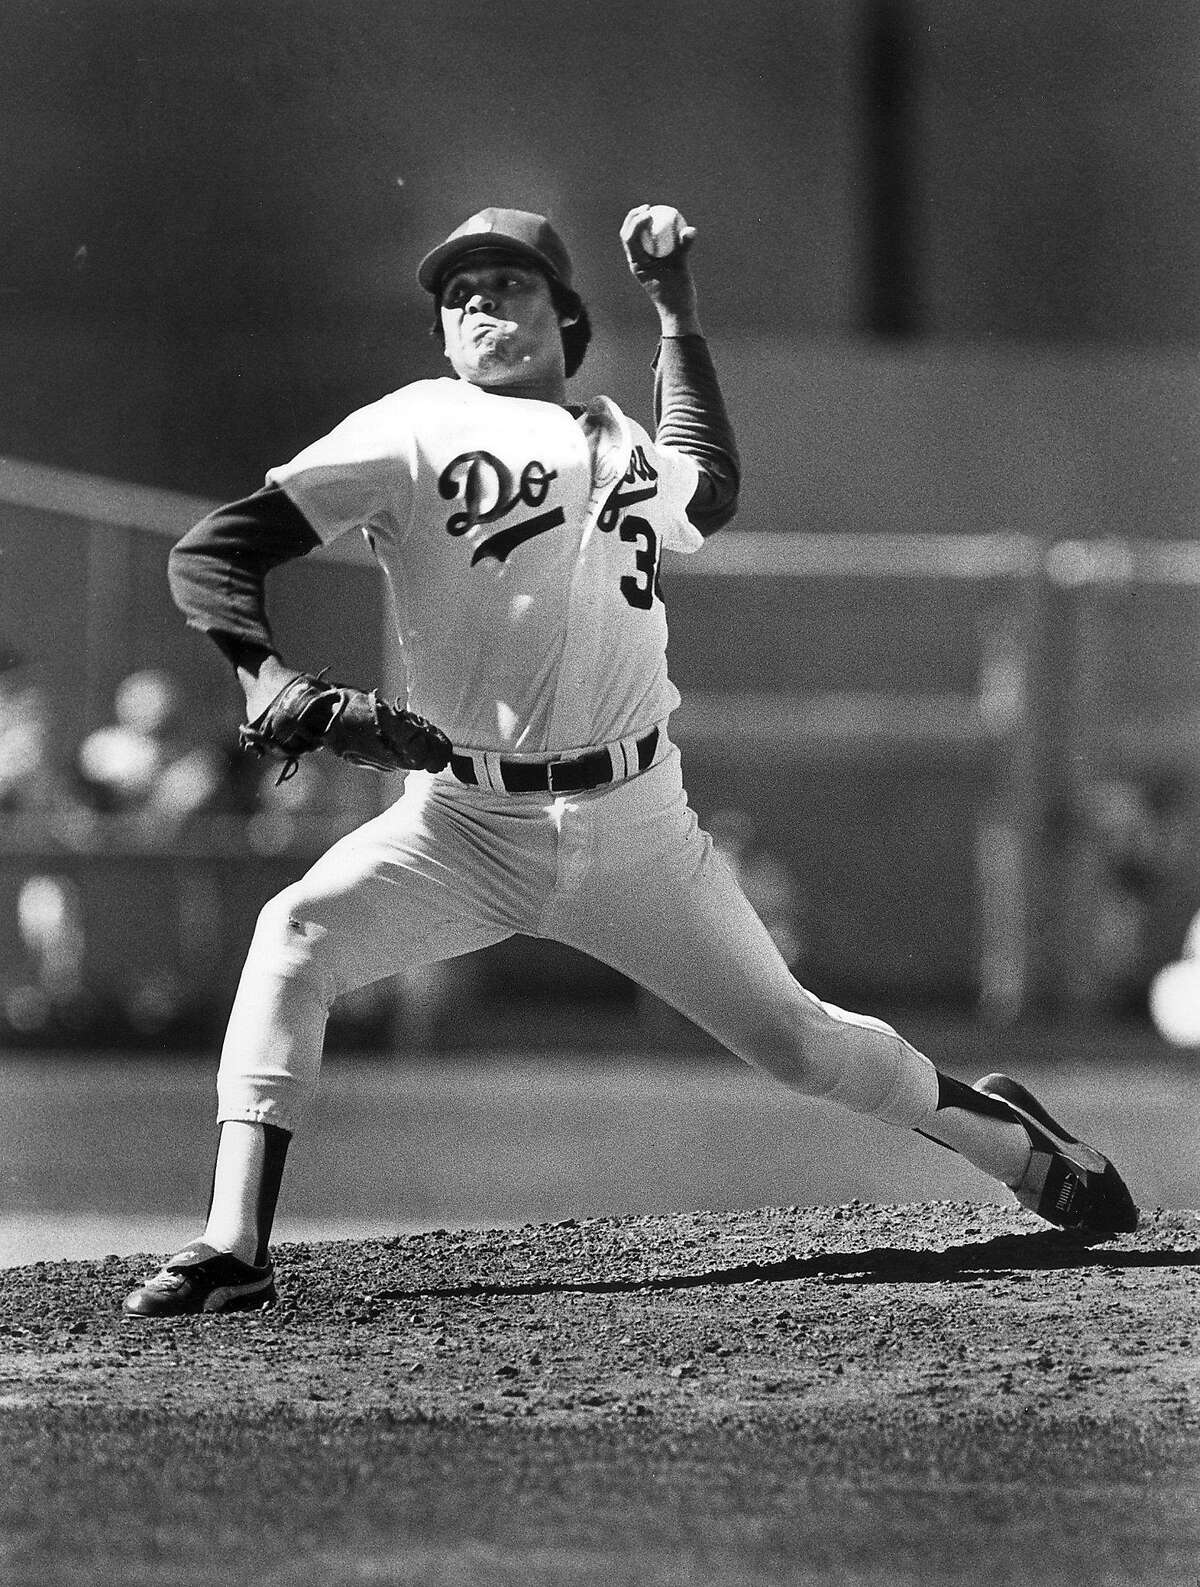 In 1981, Los Angeles Dodgers pitcher Fernando Valenzuela became the first player to win Rookie of the Year and the Cy Young Award in the same season.